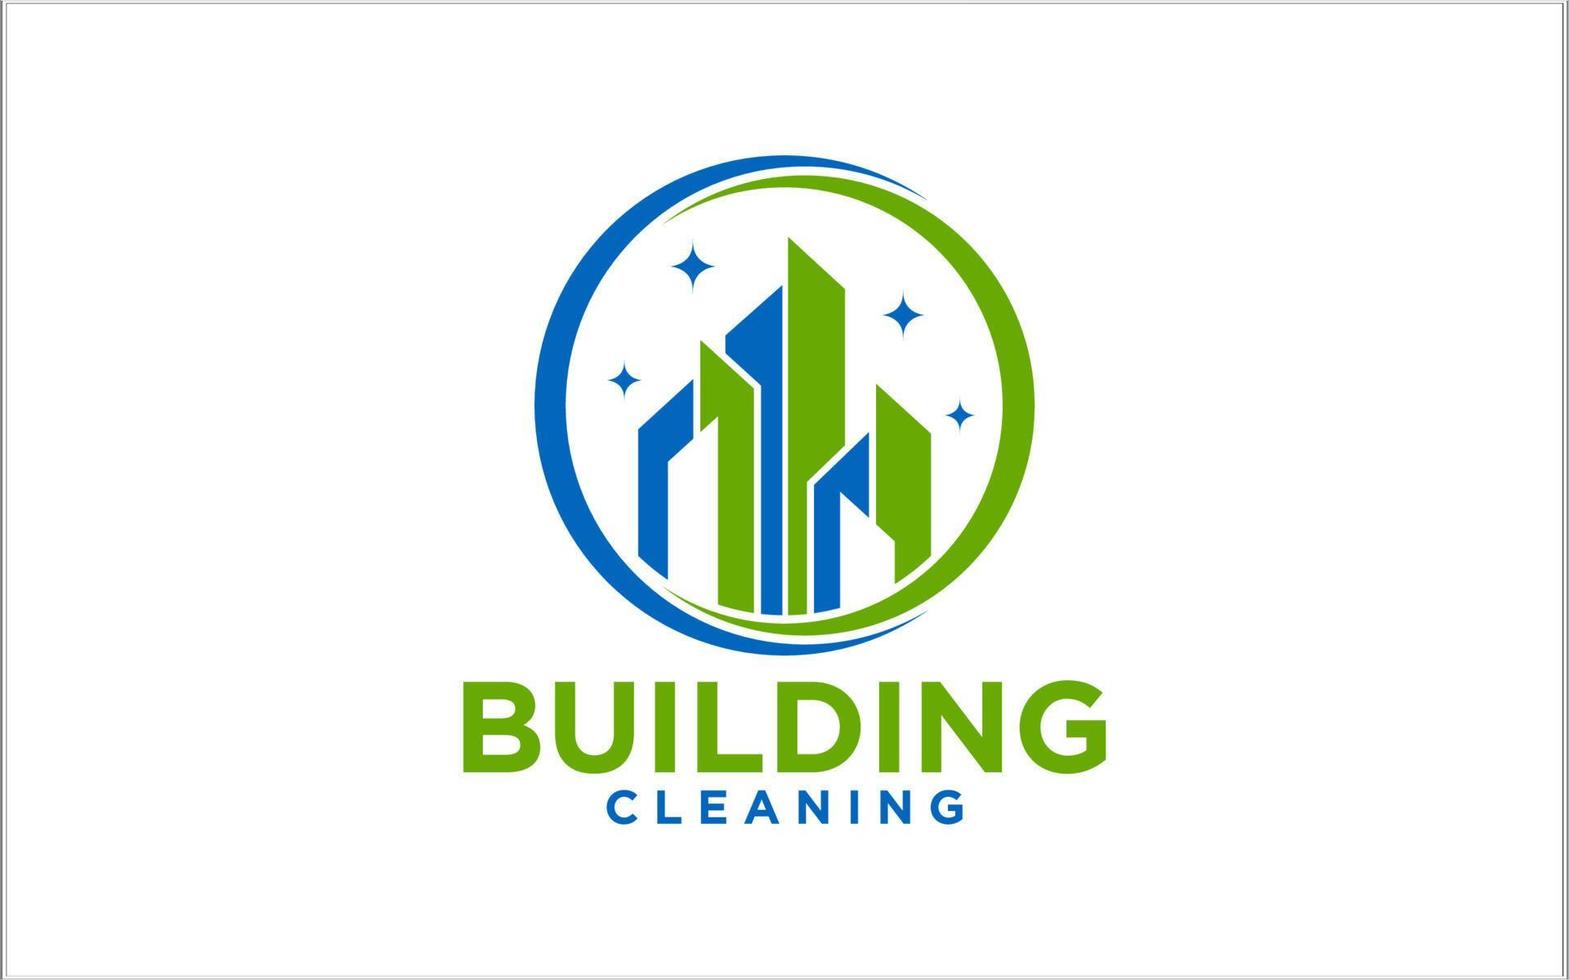 Building Cleaning Service Business logo design templates vector